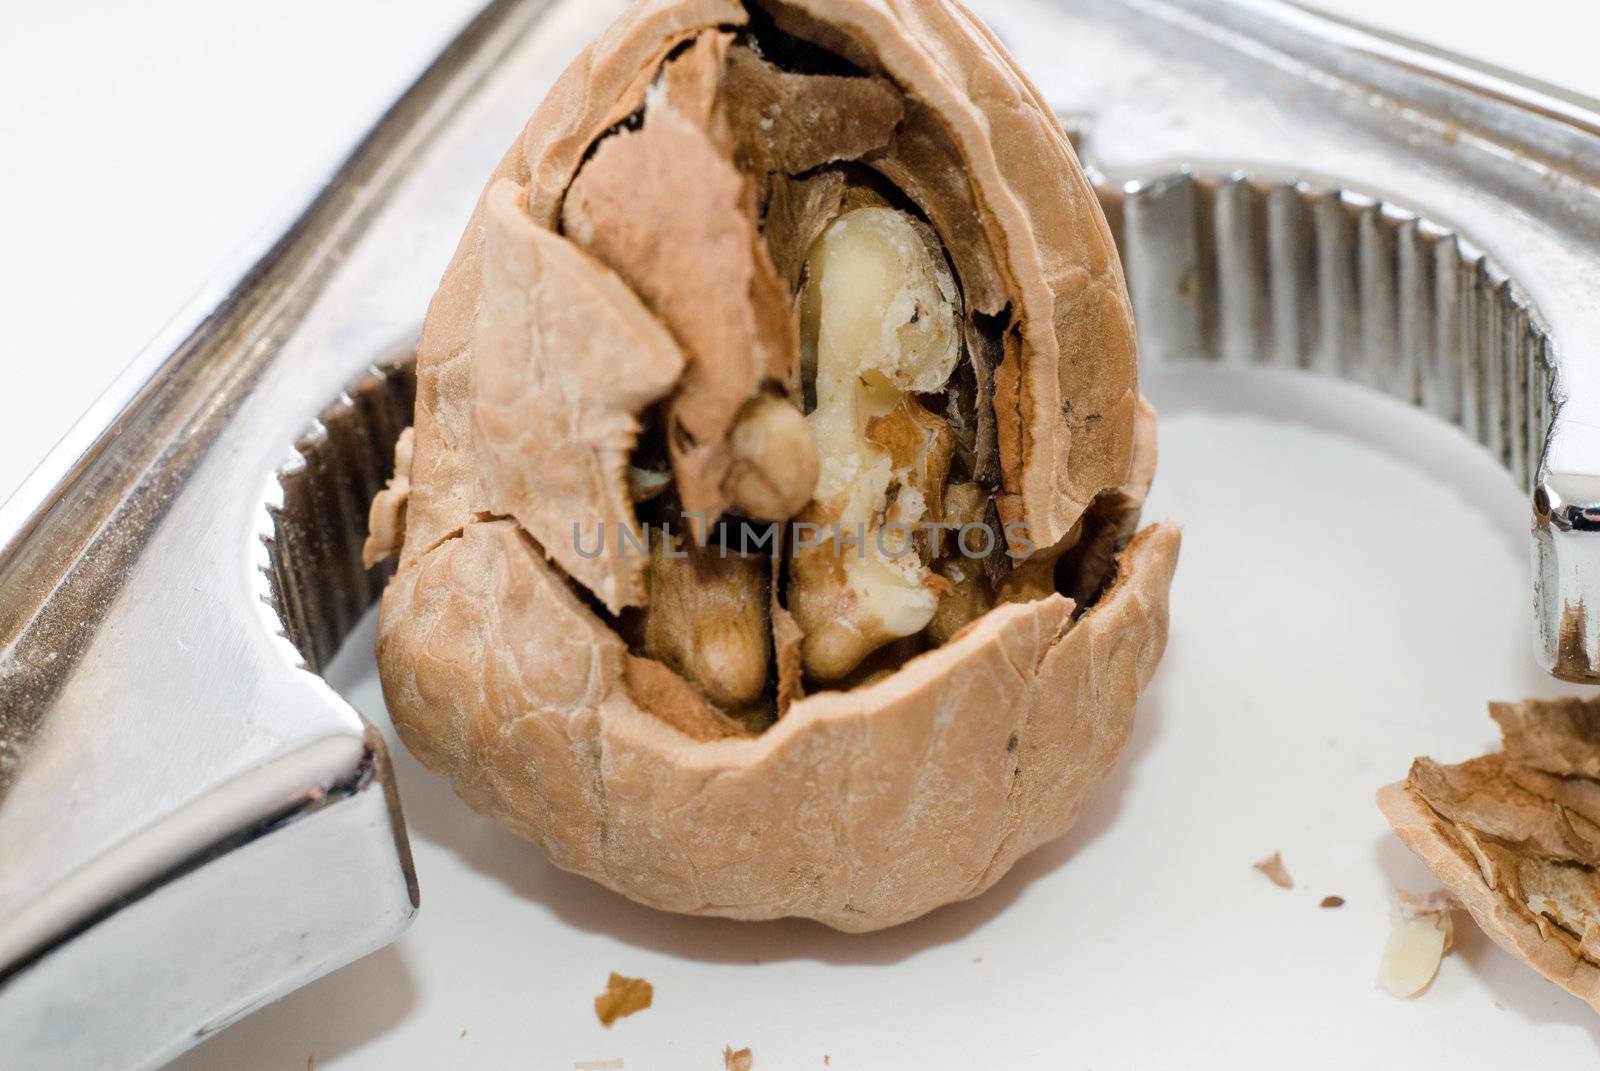 Closeup of a cracked walnut with a silver nutcracker, shot on a white background